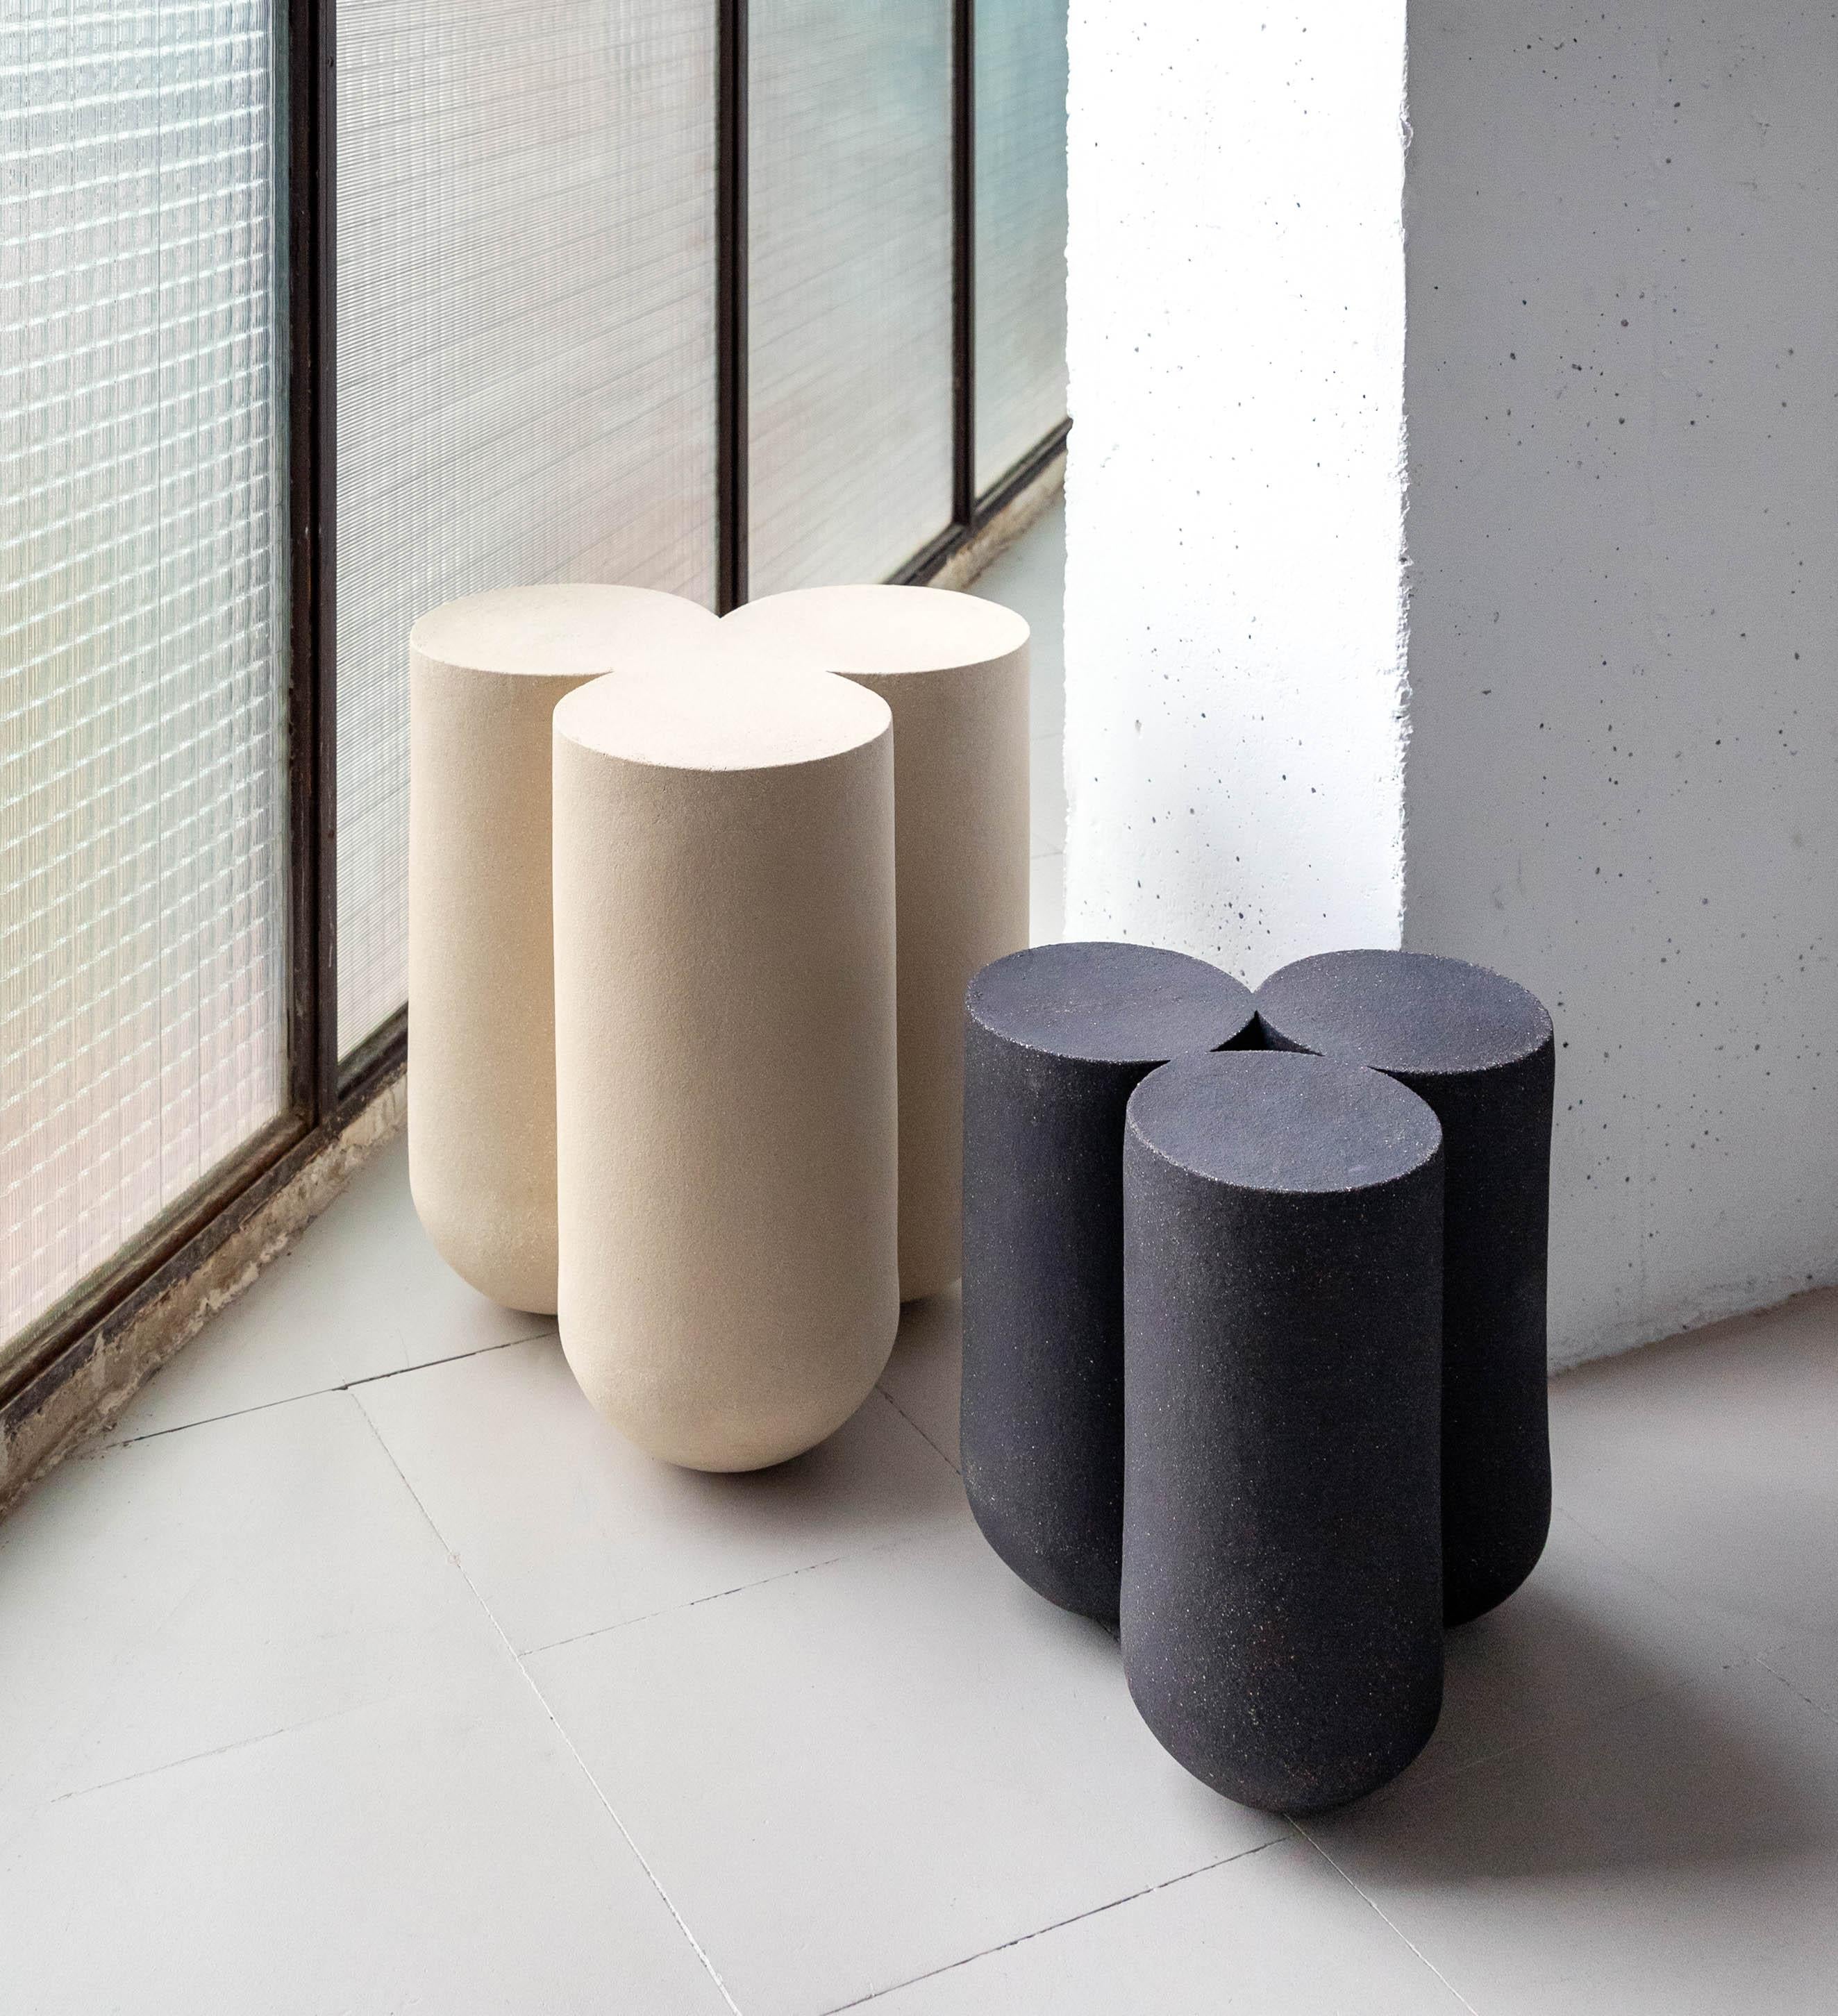 Clay moor stool by Lisa Allegra
Moor Collection
Dimensions: Ø 32 x 35 cm
Materials: Clay


Born in 1986 in Paris, Lisa Allegra has earned in 2010 a degree in furniture design from the École Supérieure des Arts Décoratifs. She has worked for